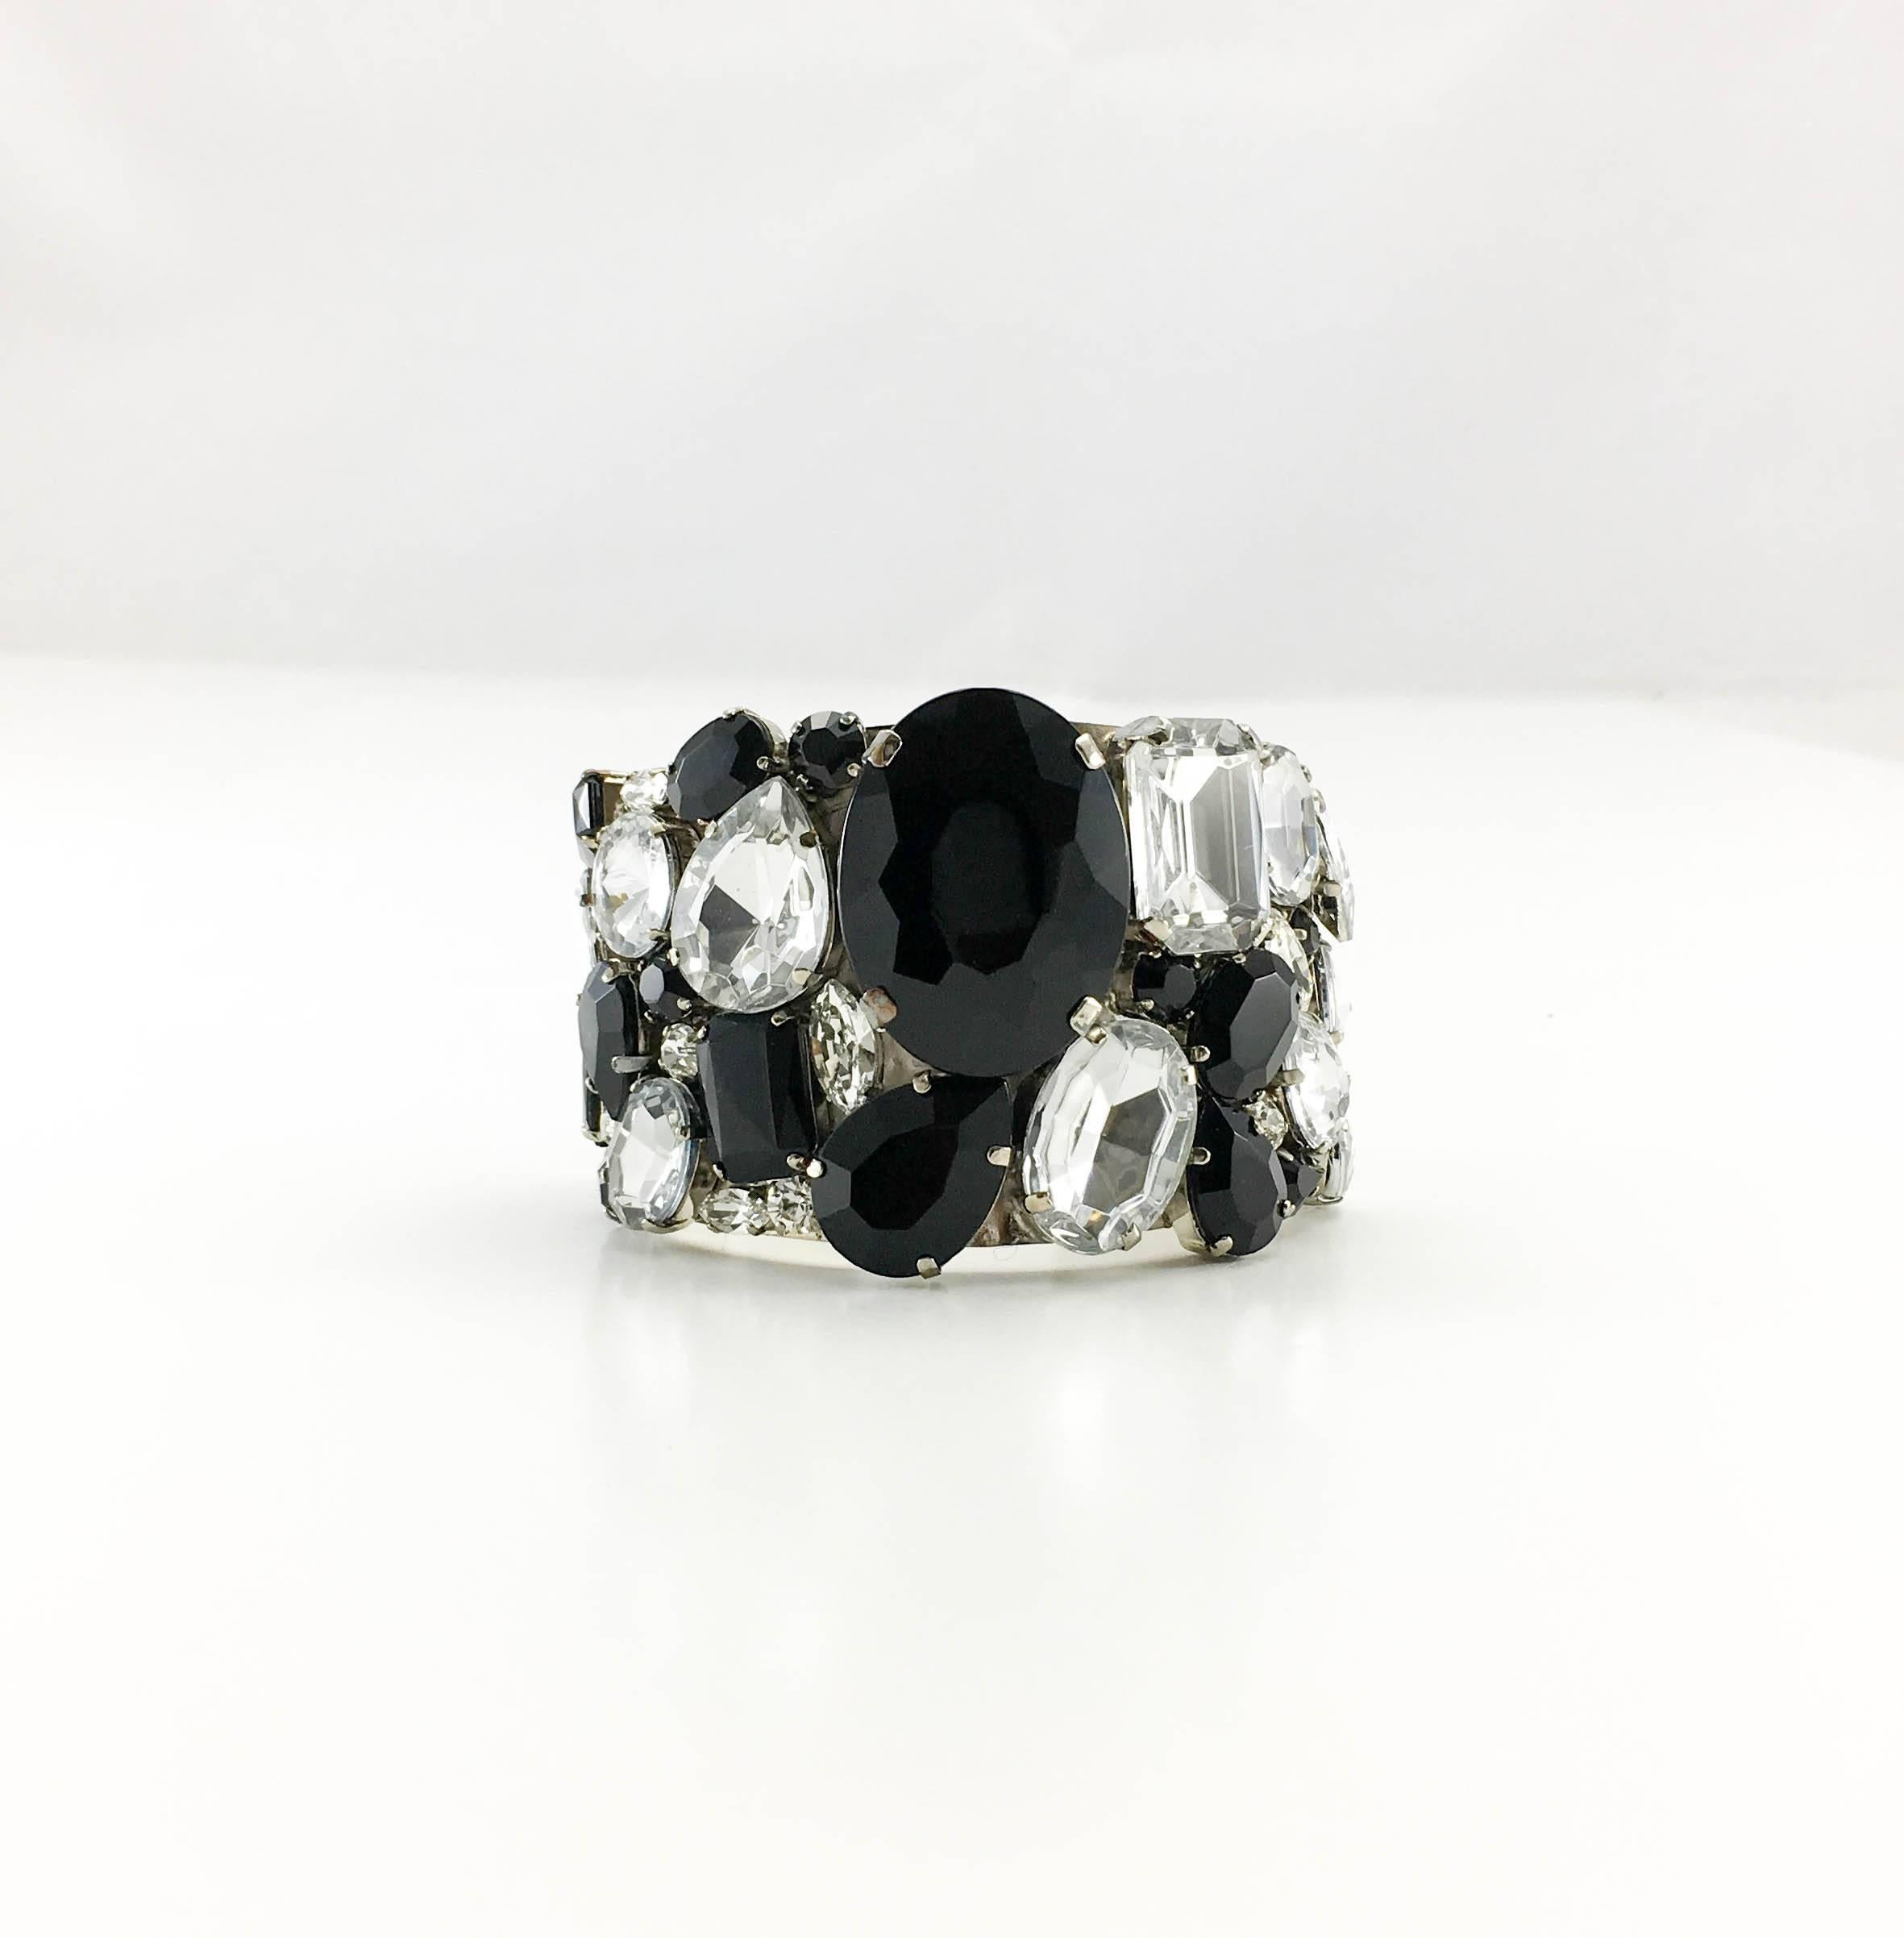 Armani Hand-Made Black Glass and Crystal Cuff Bracelet - 21st Century In Excellent Condition In London, Chelsea